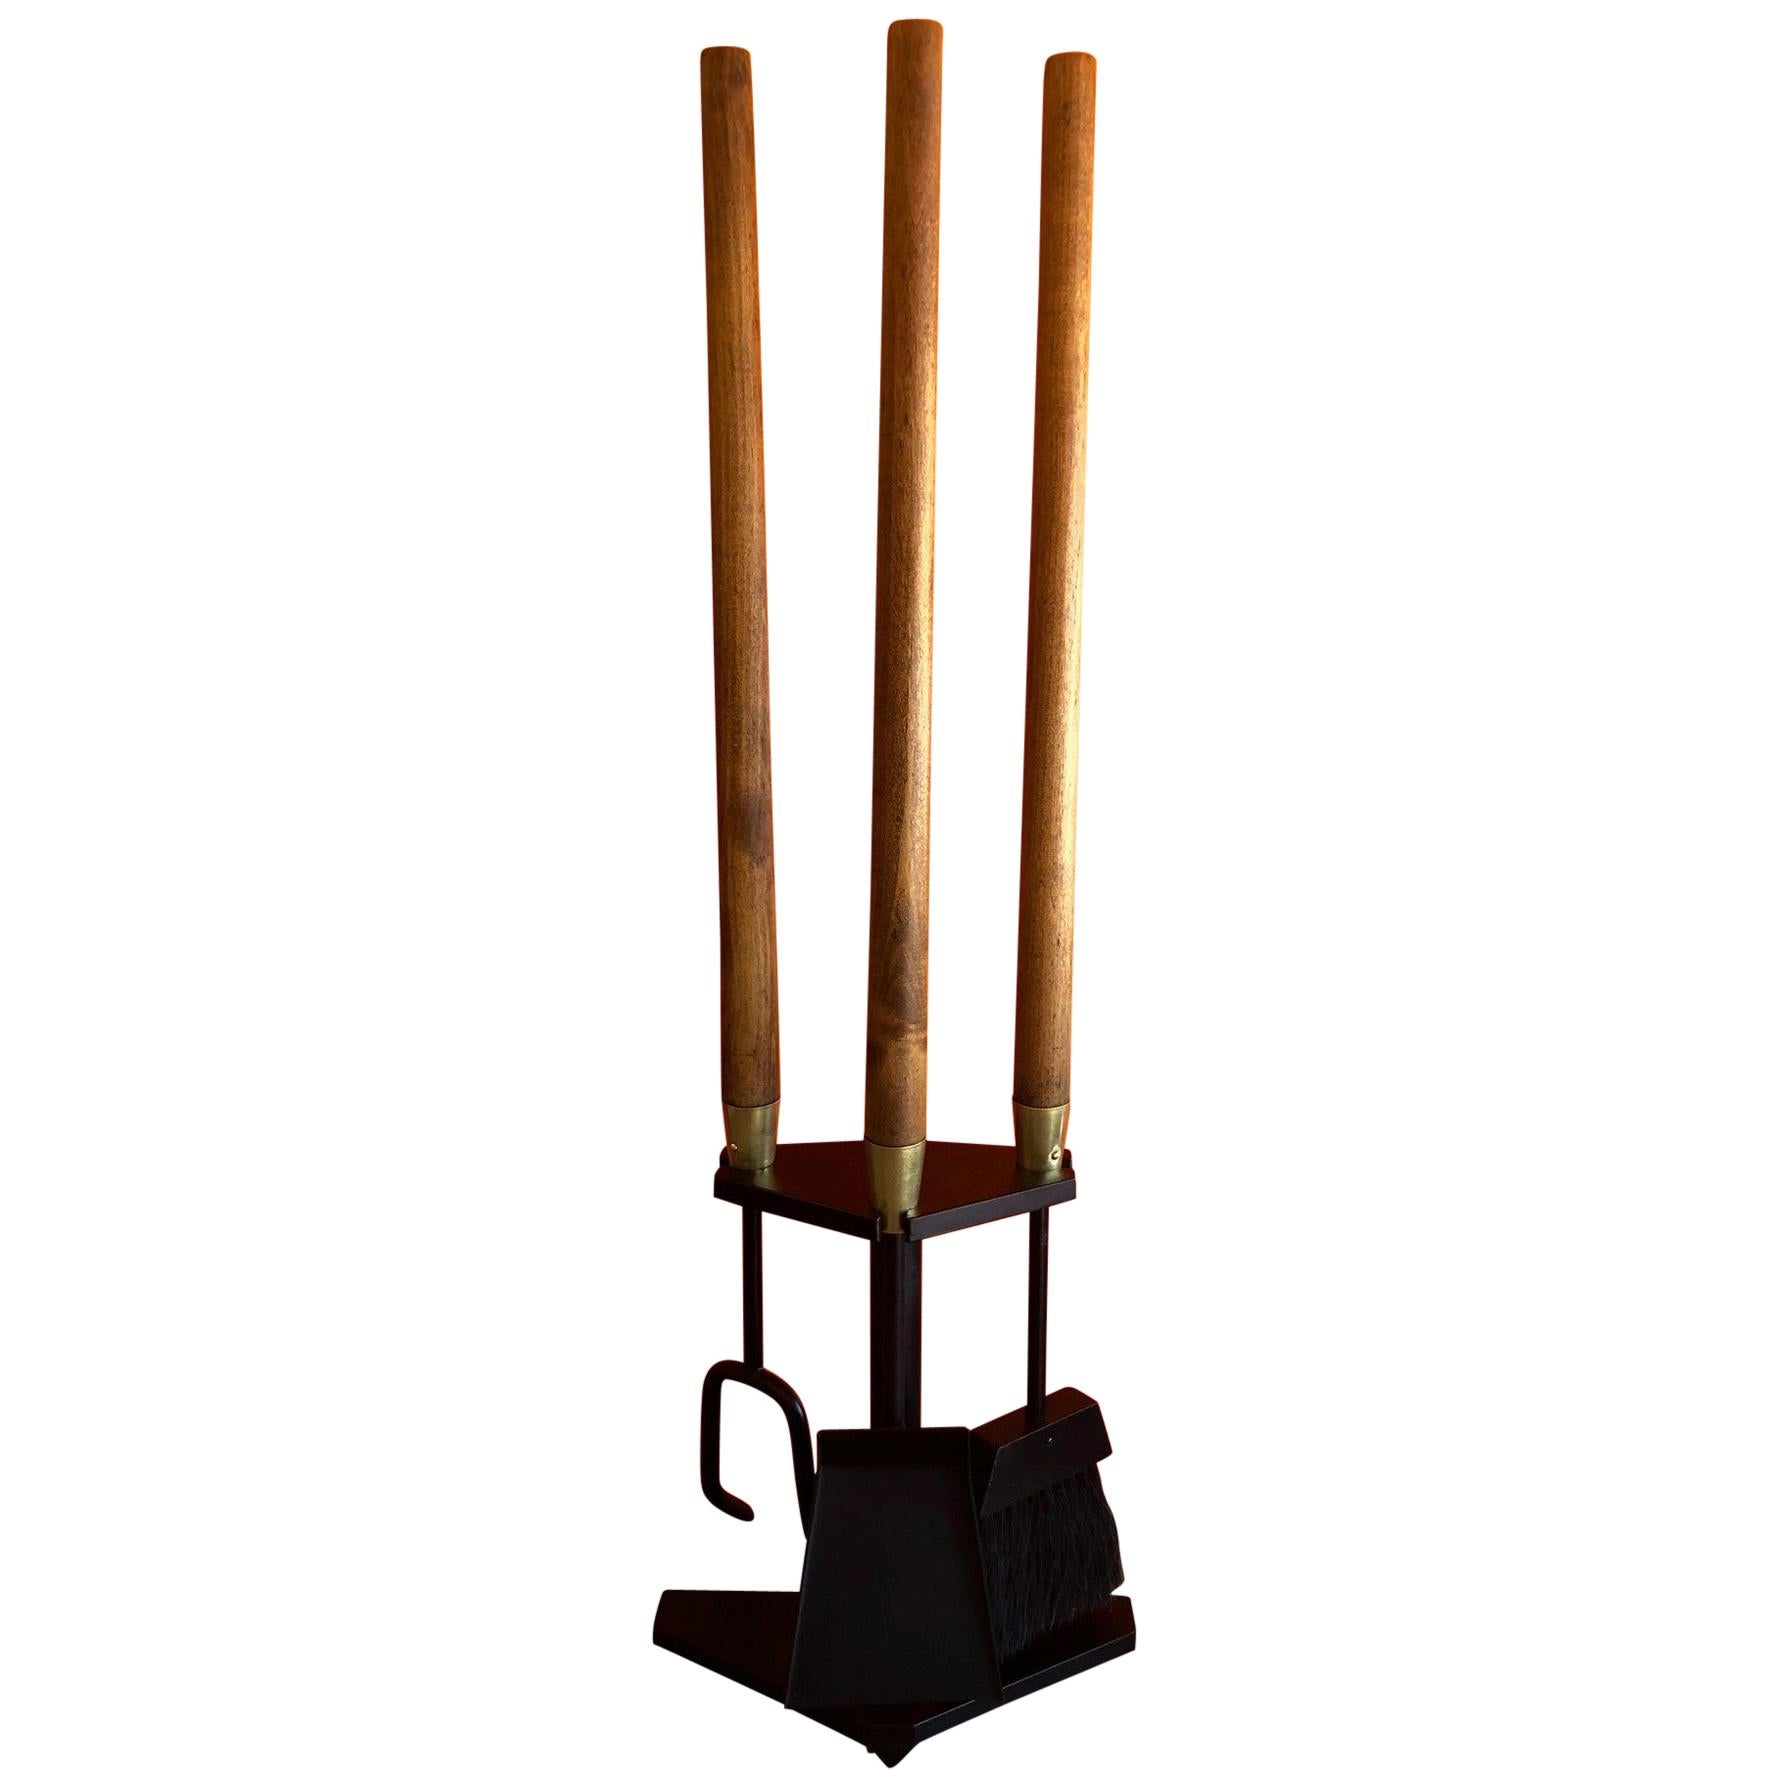 Modernist Set of Fire Place Tools in Iron, Walnut and Brass by Seymour Mfg